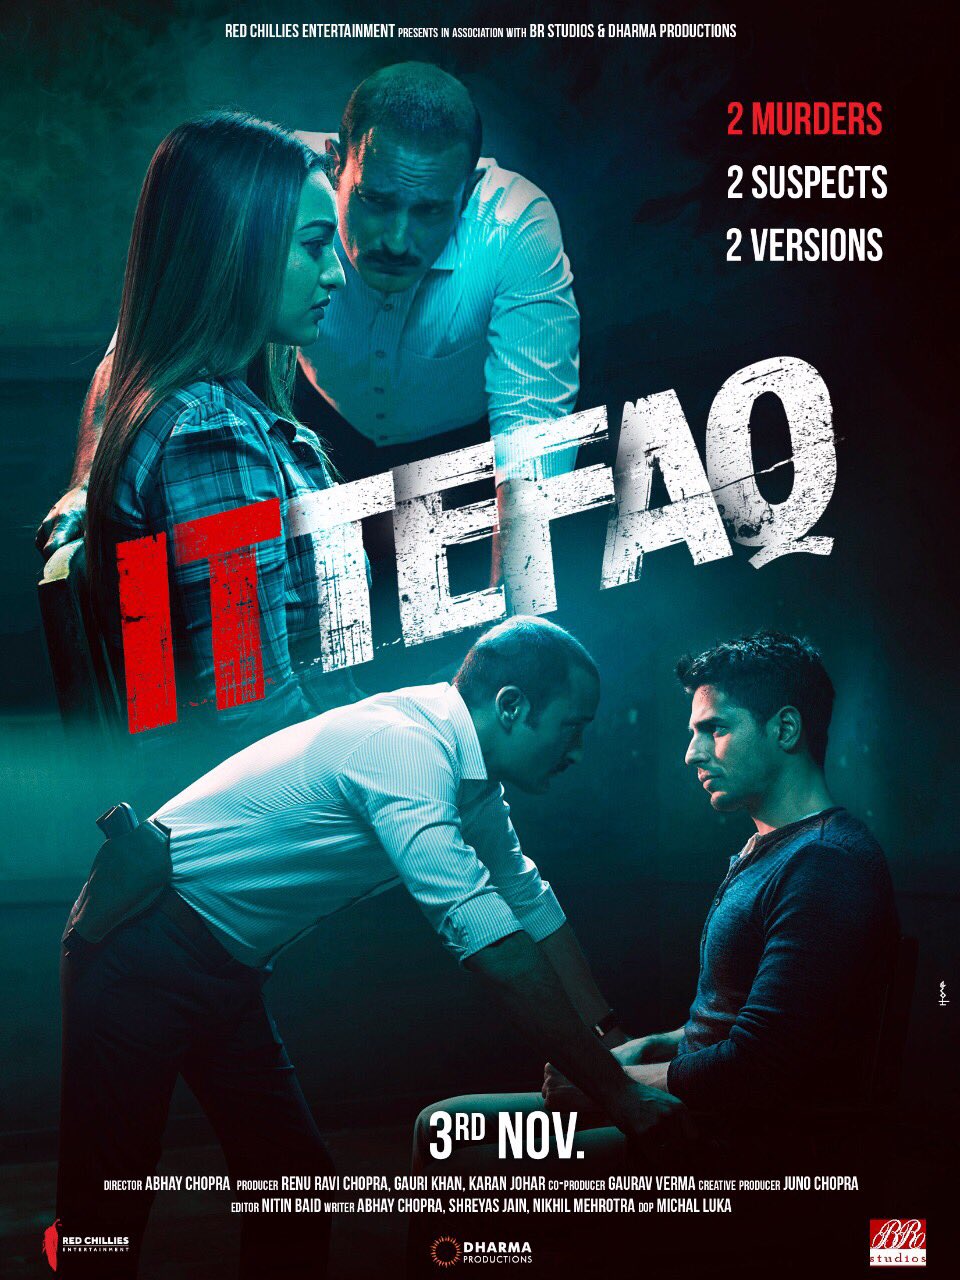 EXCLUSIVE: Will the No-Promotion technique for Sidharth-Sonakshi's Ittefaq work? Trade Experts reveal